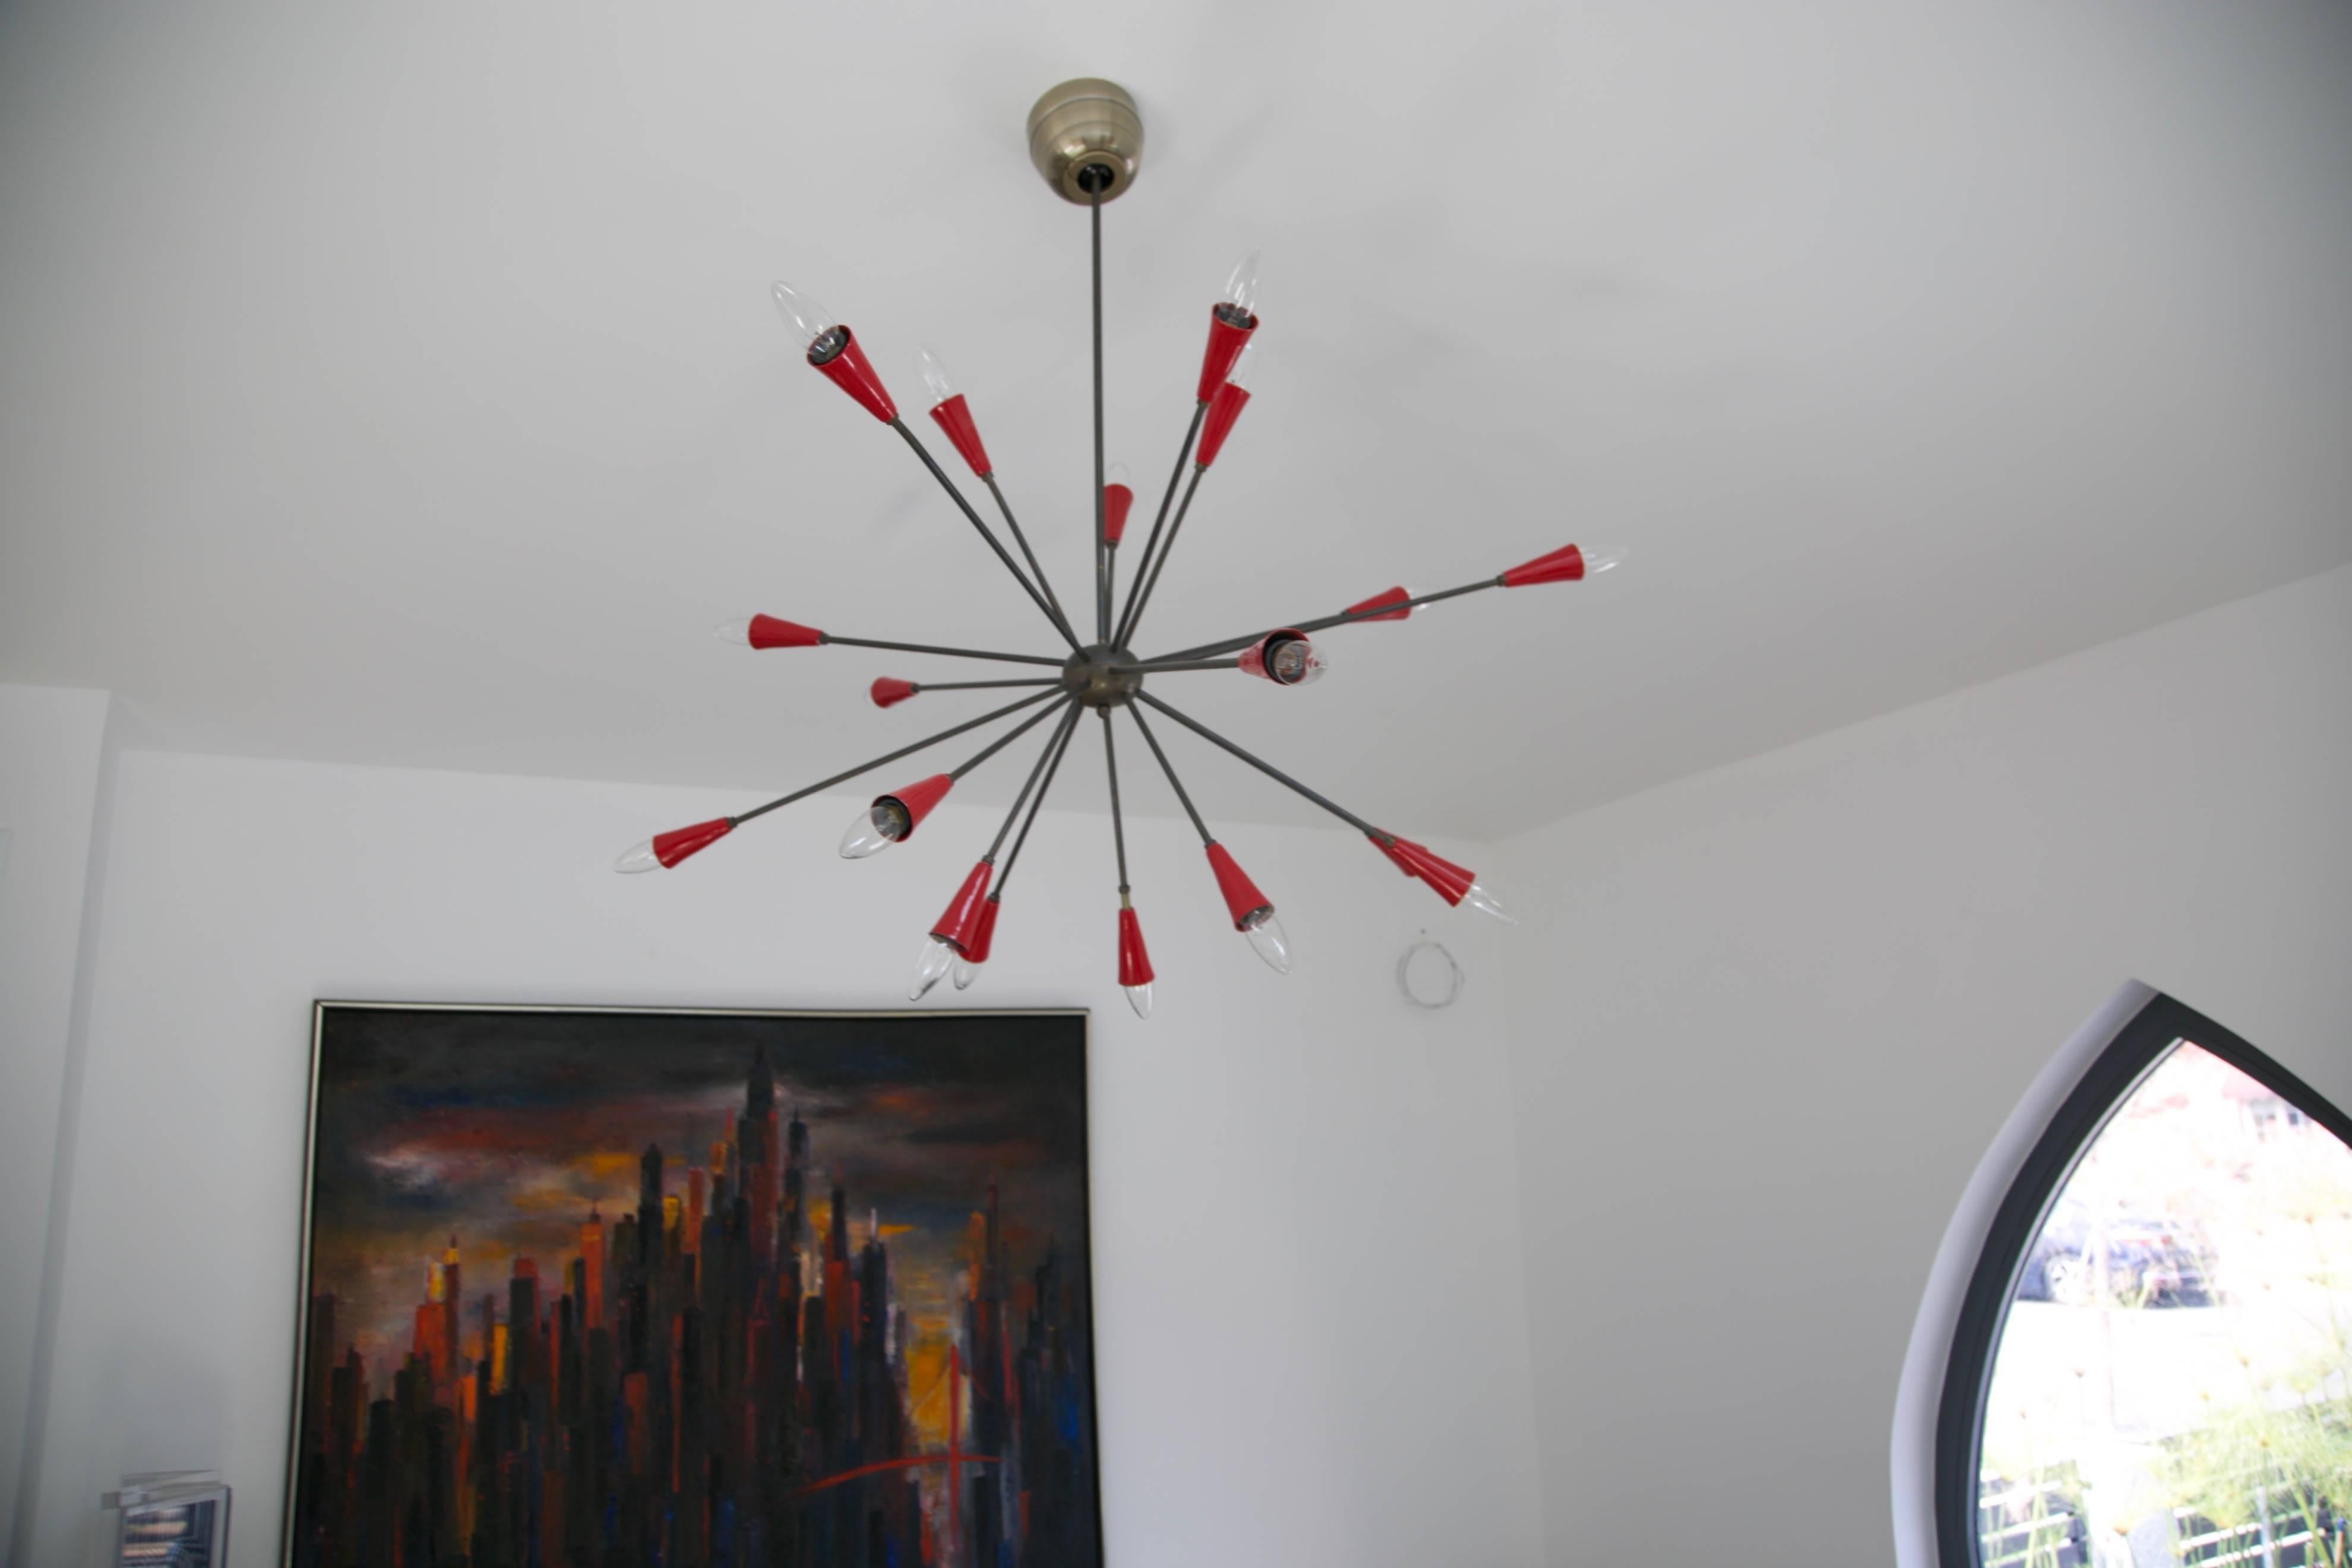 Eye-catching Italian chandelier circa 1950 attributed to Stilnovo. This classic light fixture is comprised of seventeen black arms projecting from a spherical center with contrast red cone sockets at the ends. An amazing way to add some pop color to